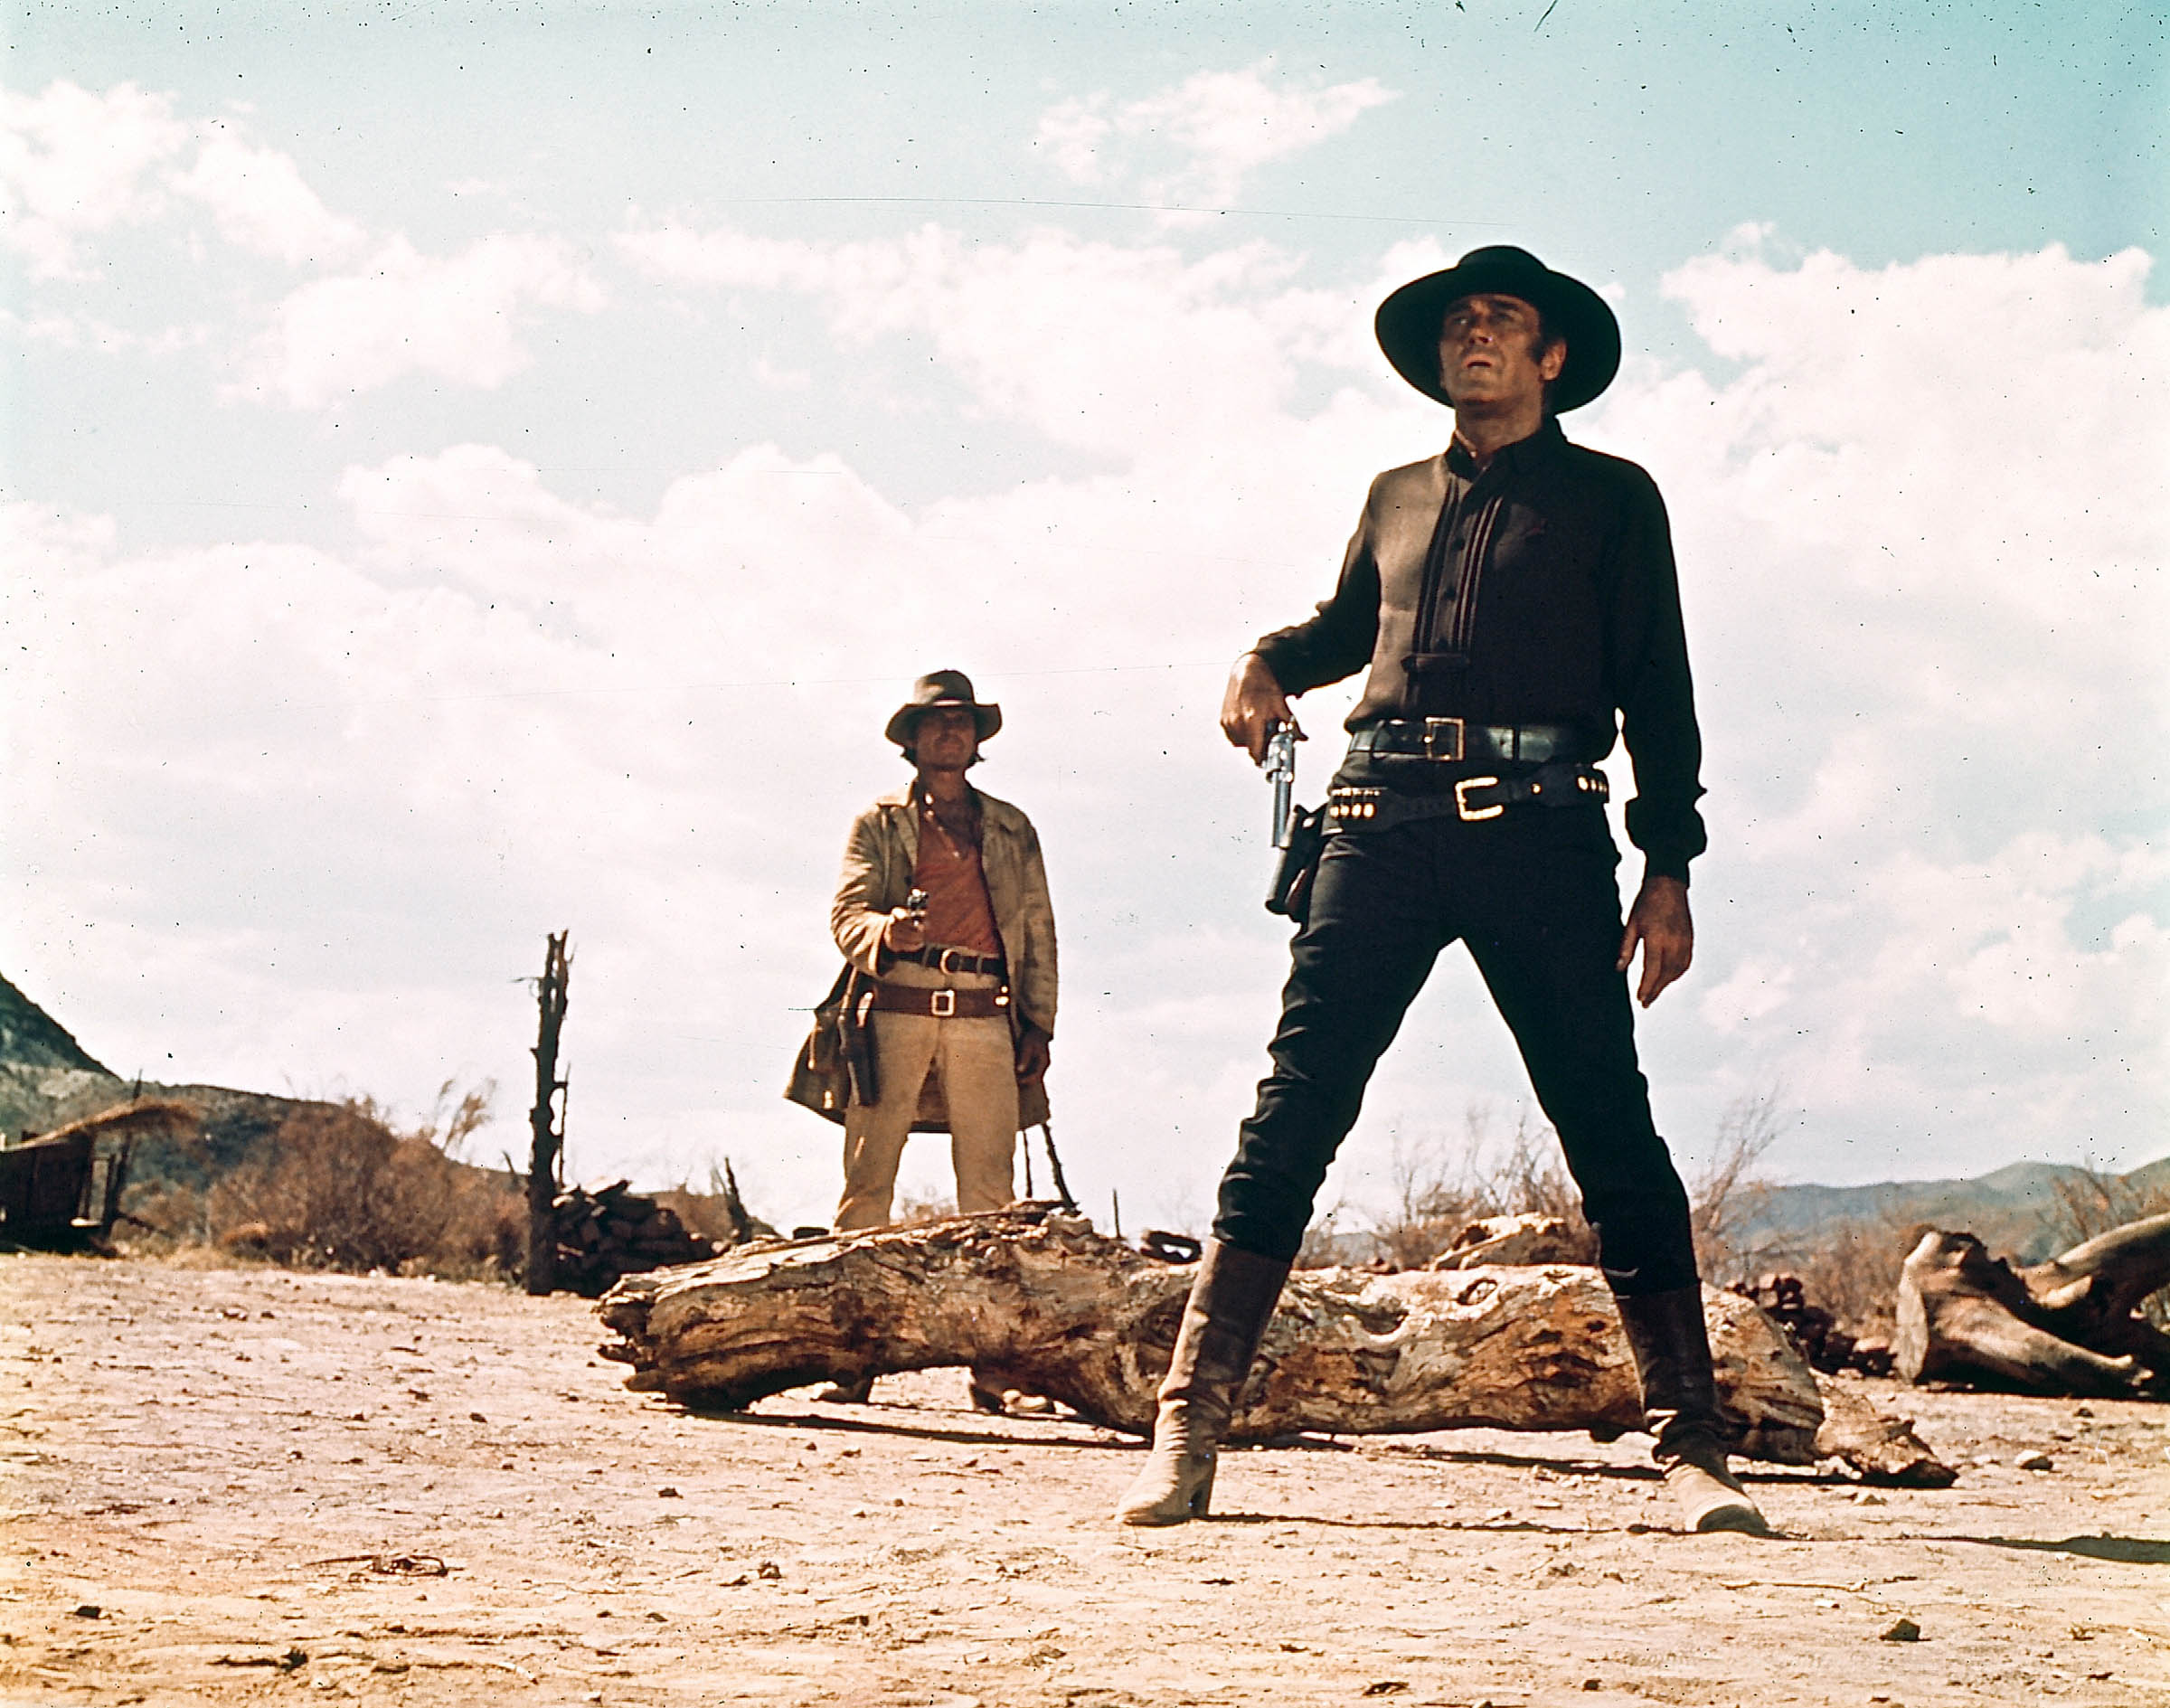 Once Upon A Time In The West C'era una volta il West Charles Bronson Henry Fonda